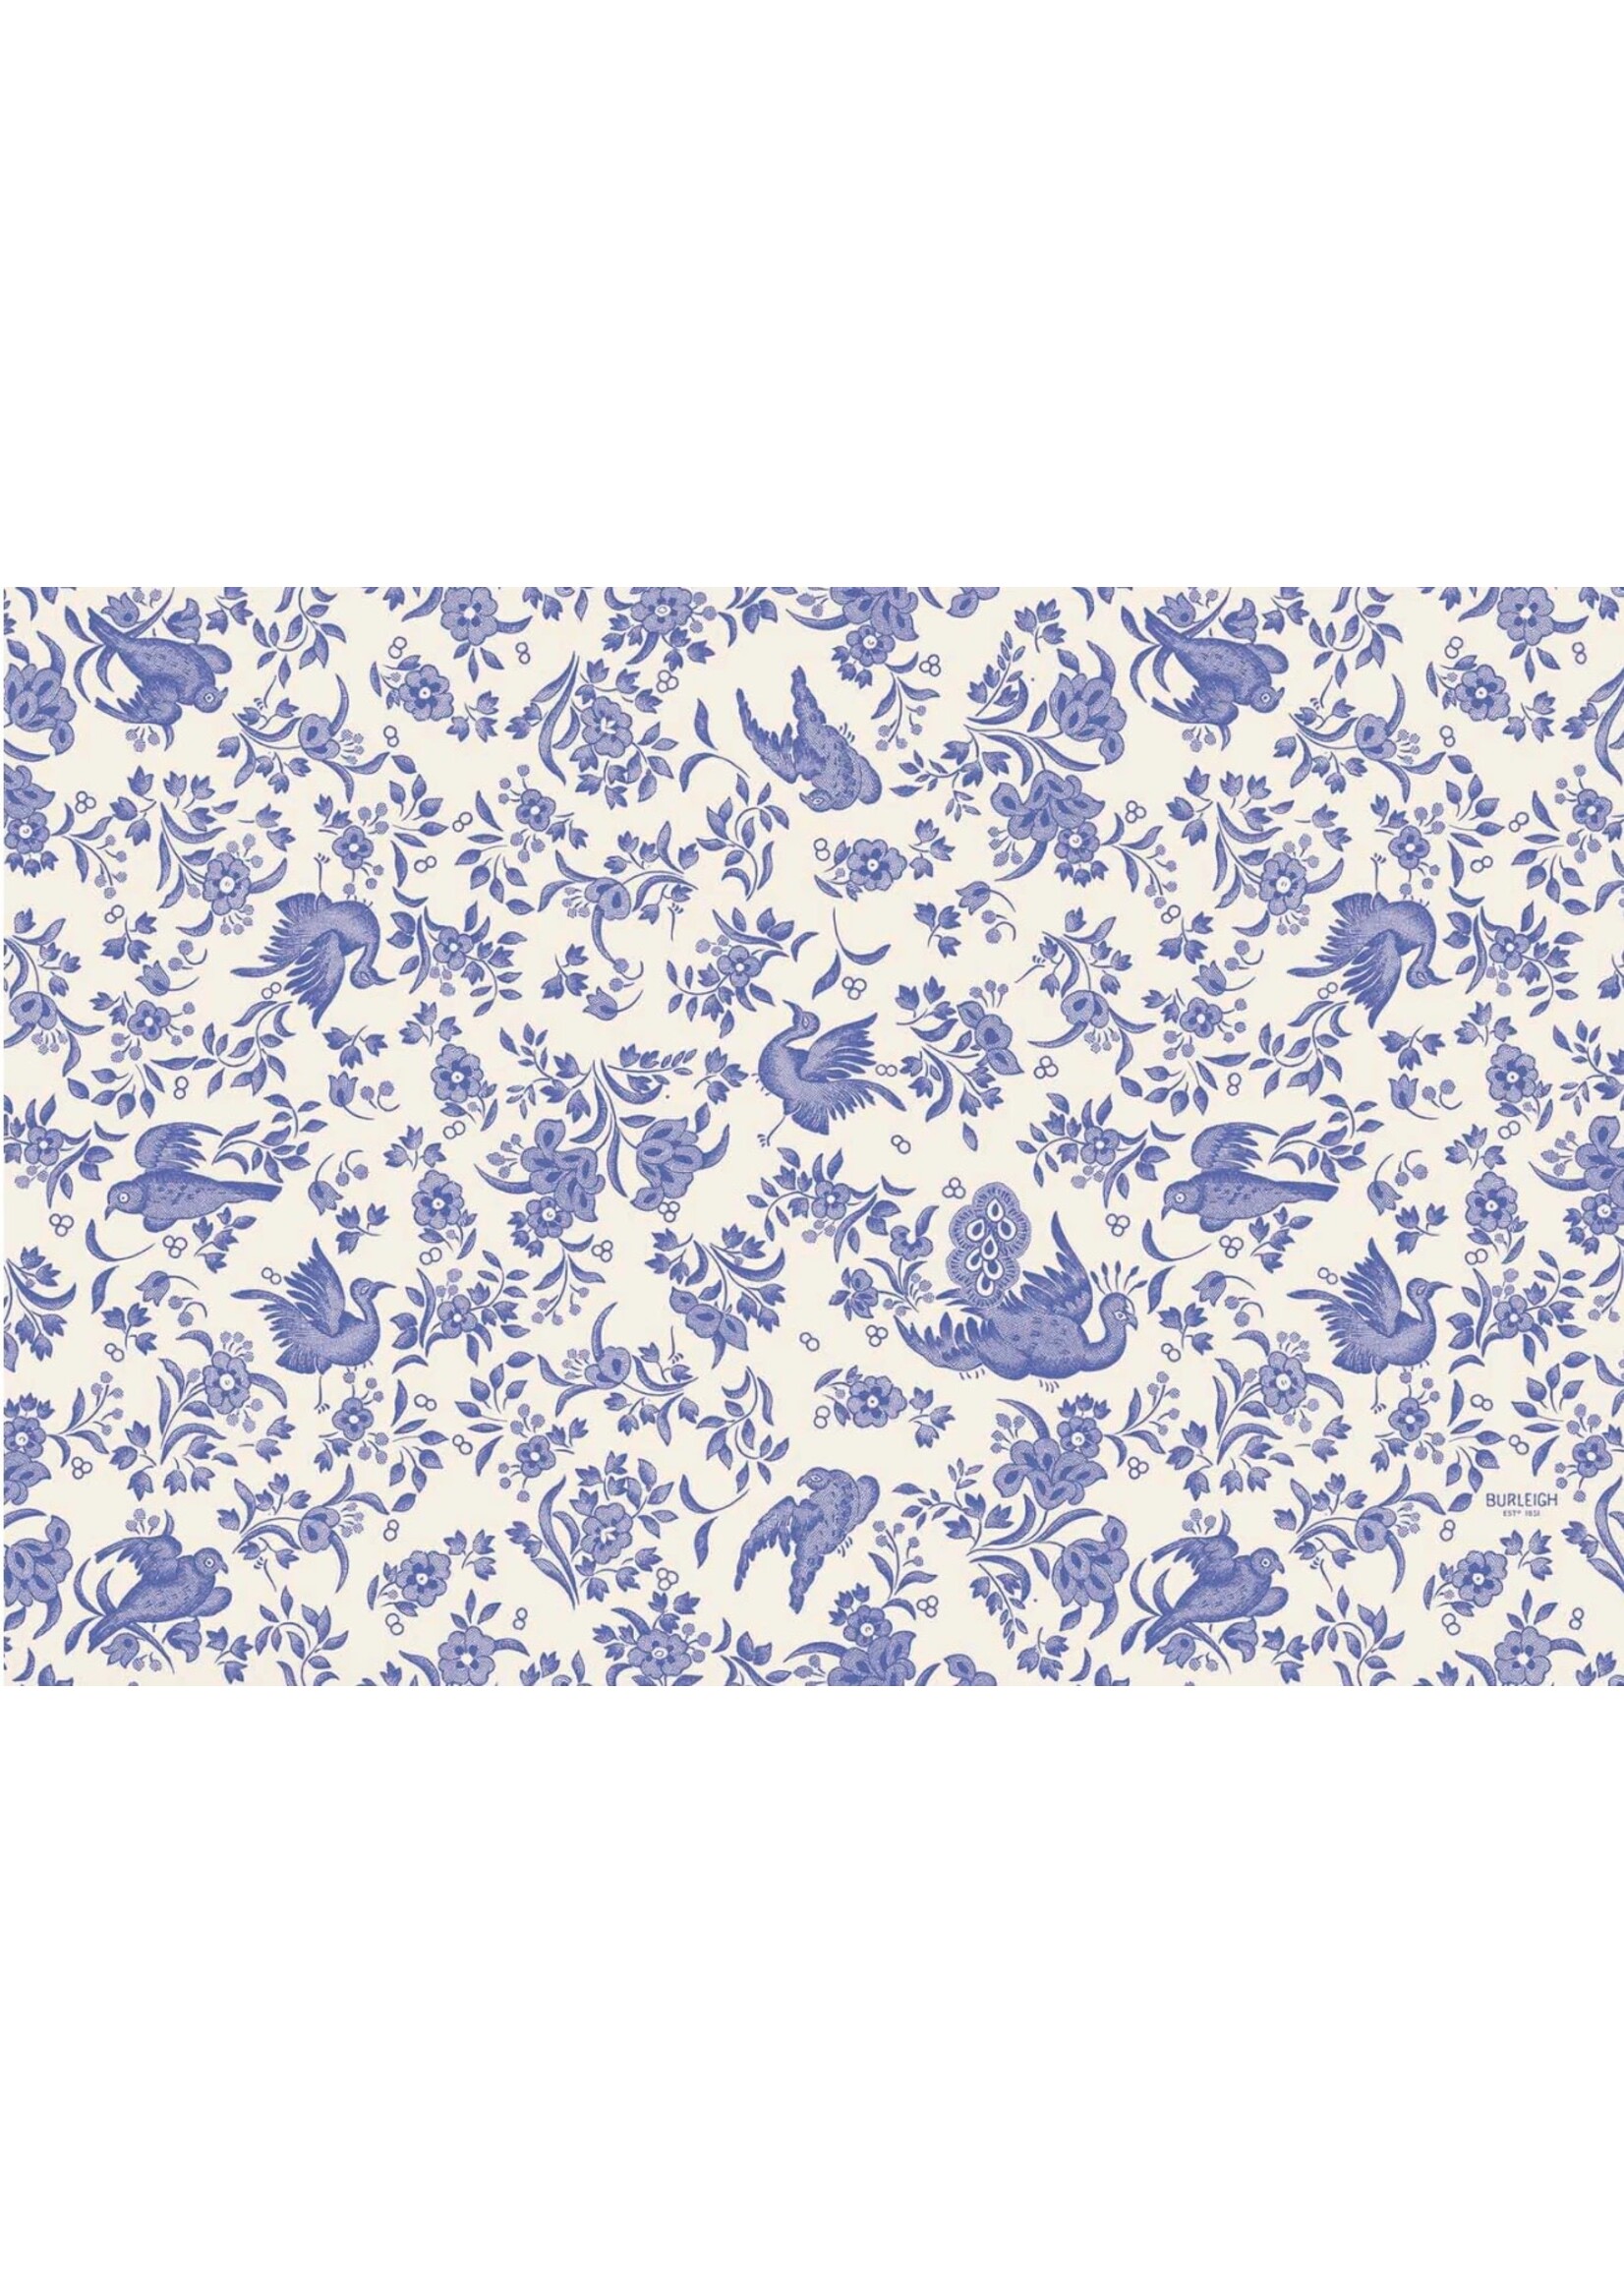 Hester & Cook Paper Placemats - Regal Peacock Blue (24 sheets)